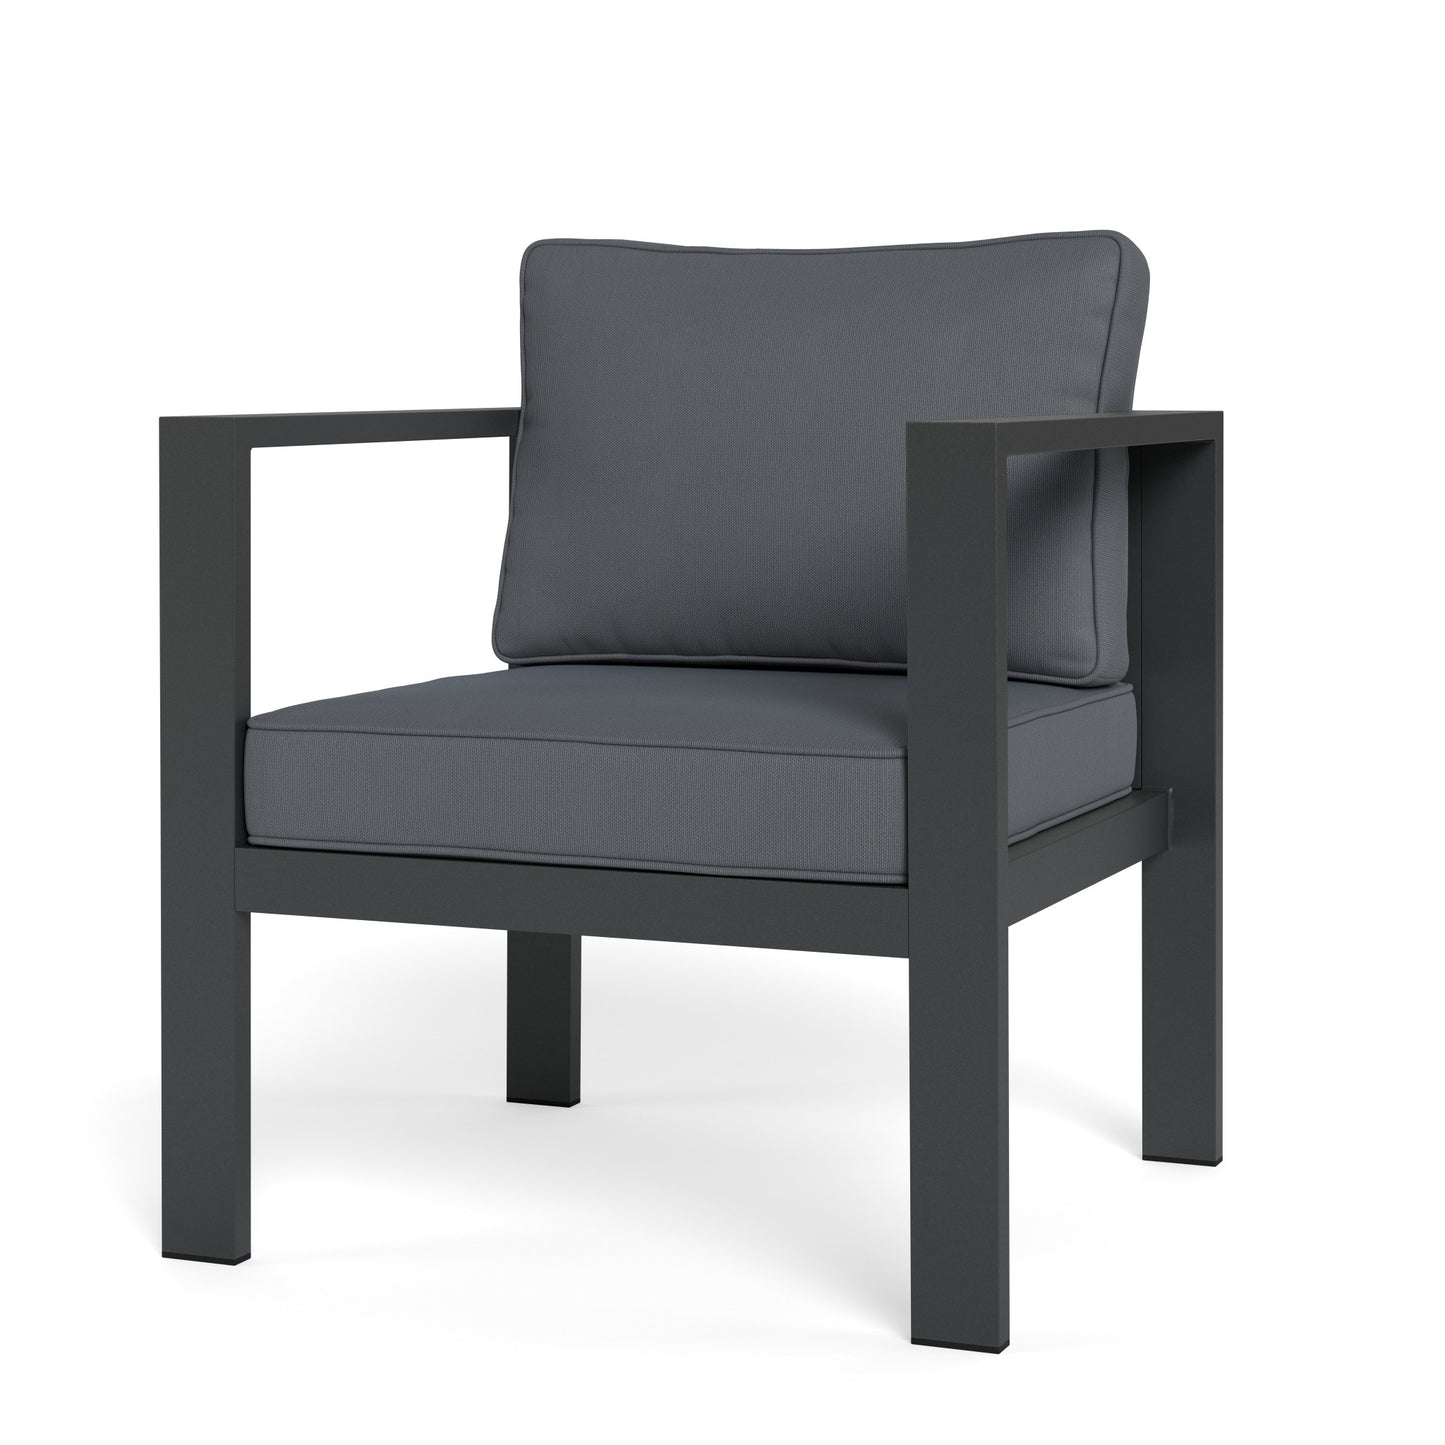 Lakeview, 2-Pc Seat Set, Chair/Otto - Grey/Charcoal